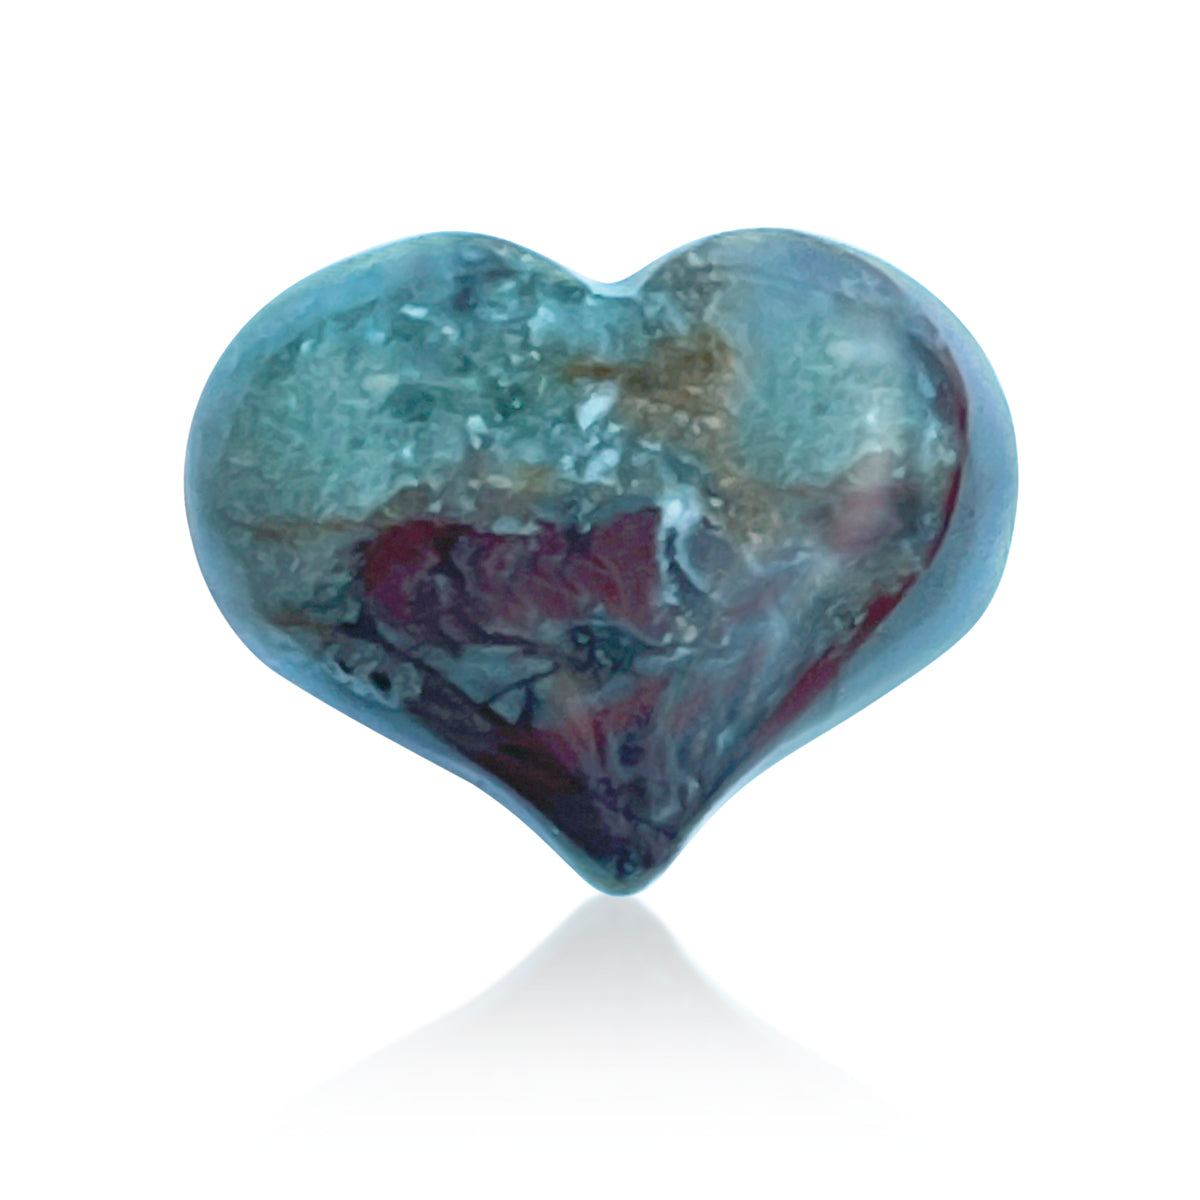 Bloodstone Heart Shaped Healing Gemstone for Courage